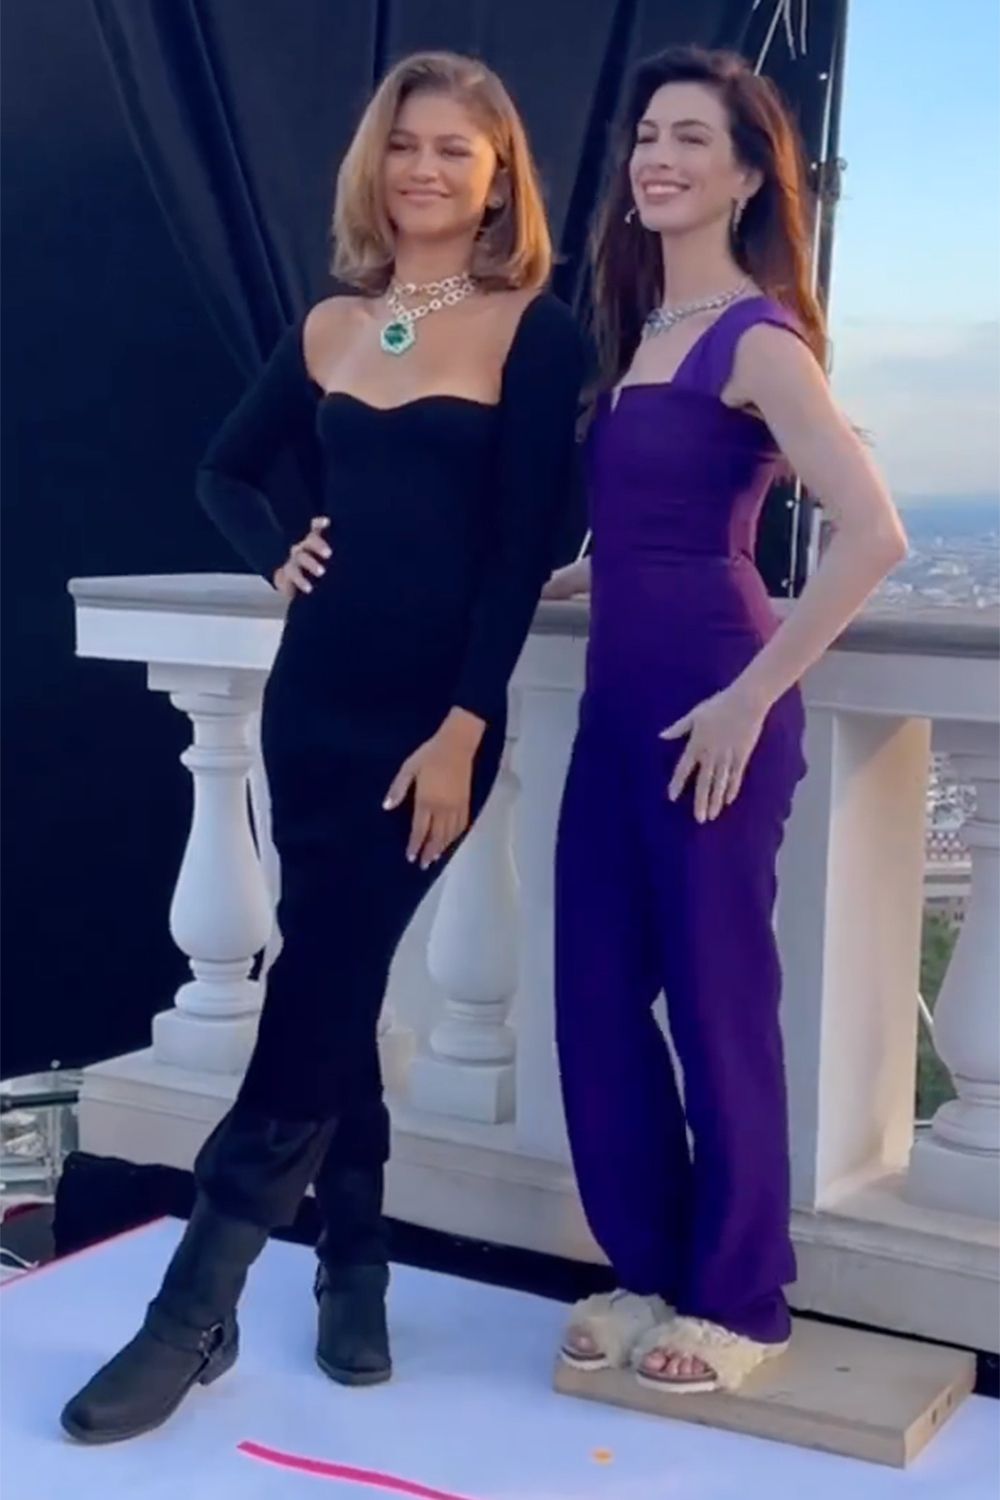 Zendaya and Anne Hathaway wearing comfy footwear during Bulgari 2023 Magnificence Never Ends campaign